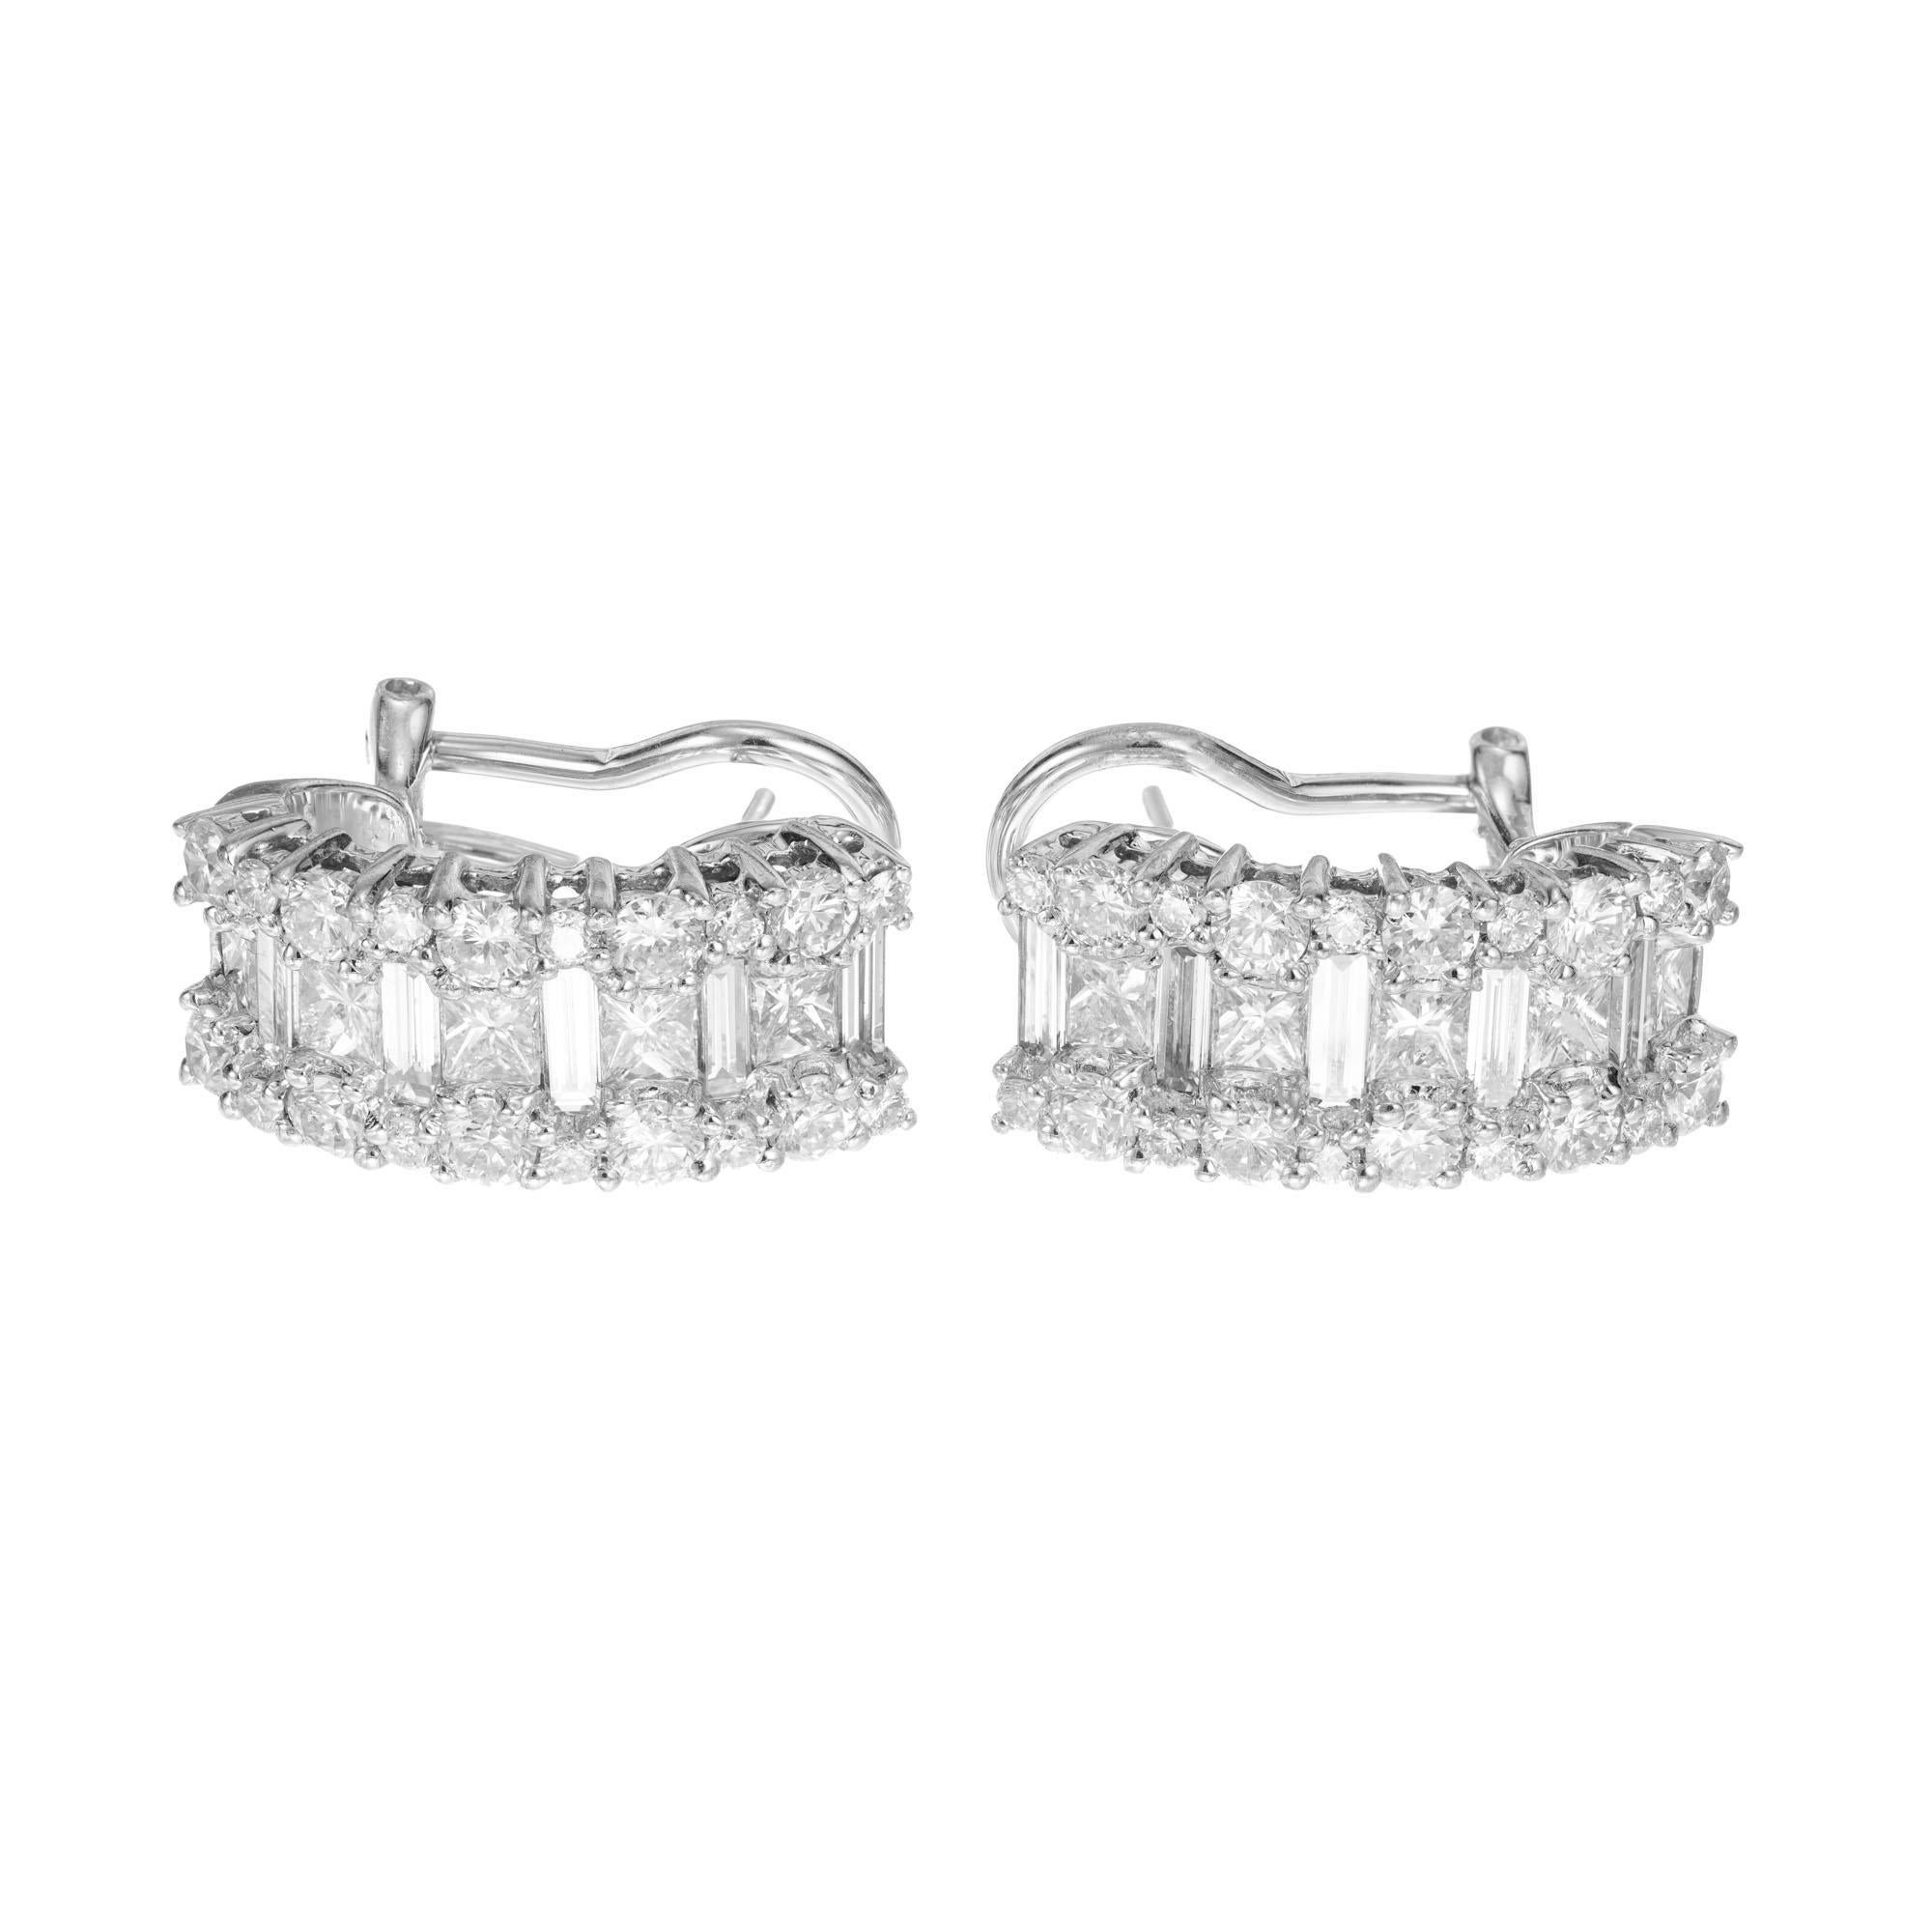 Half hoop diamond earrings. 10 princess and baguette cut diamonds each with two rows of round cut diamonds. Clip post settings in 18k white gold. 

10 princess cut diamonds approx. total weight: 1.00cts VS1, H-I
10 baguette cut diamonds approx.